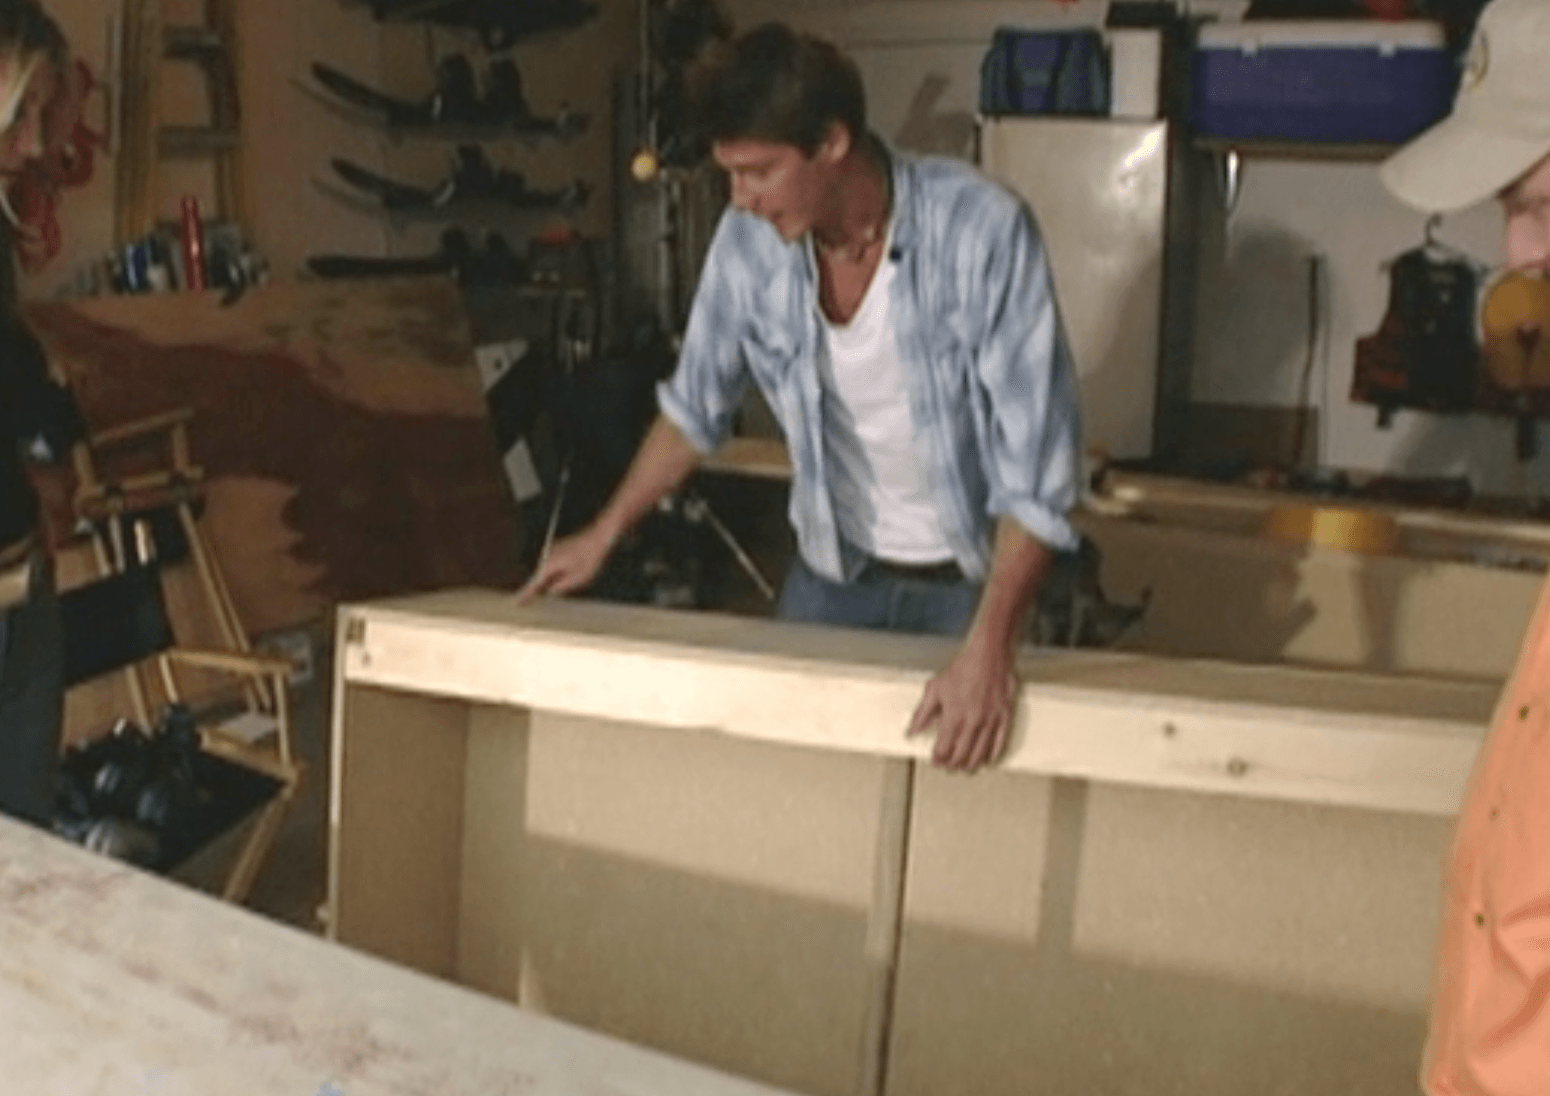 Ty Pennington on trading spaces